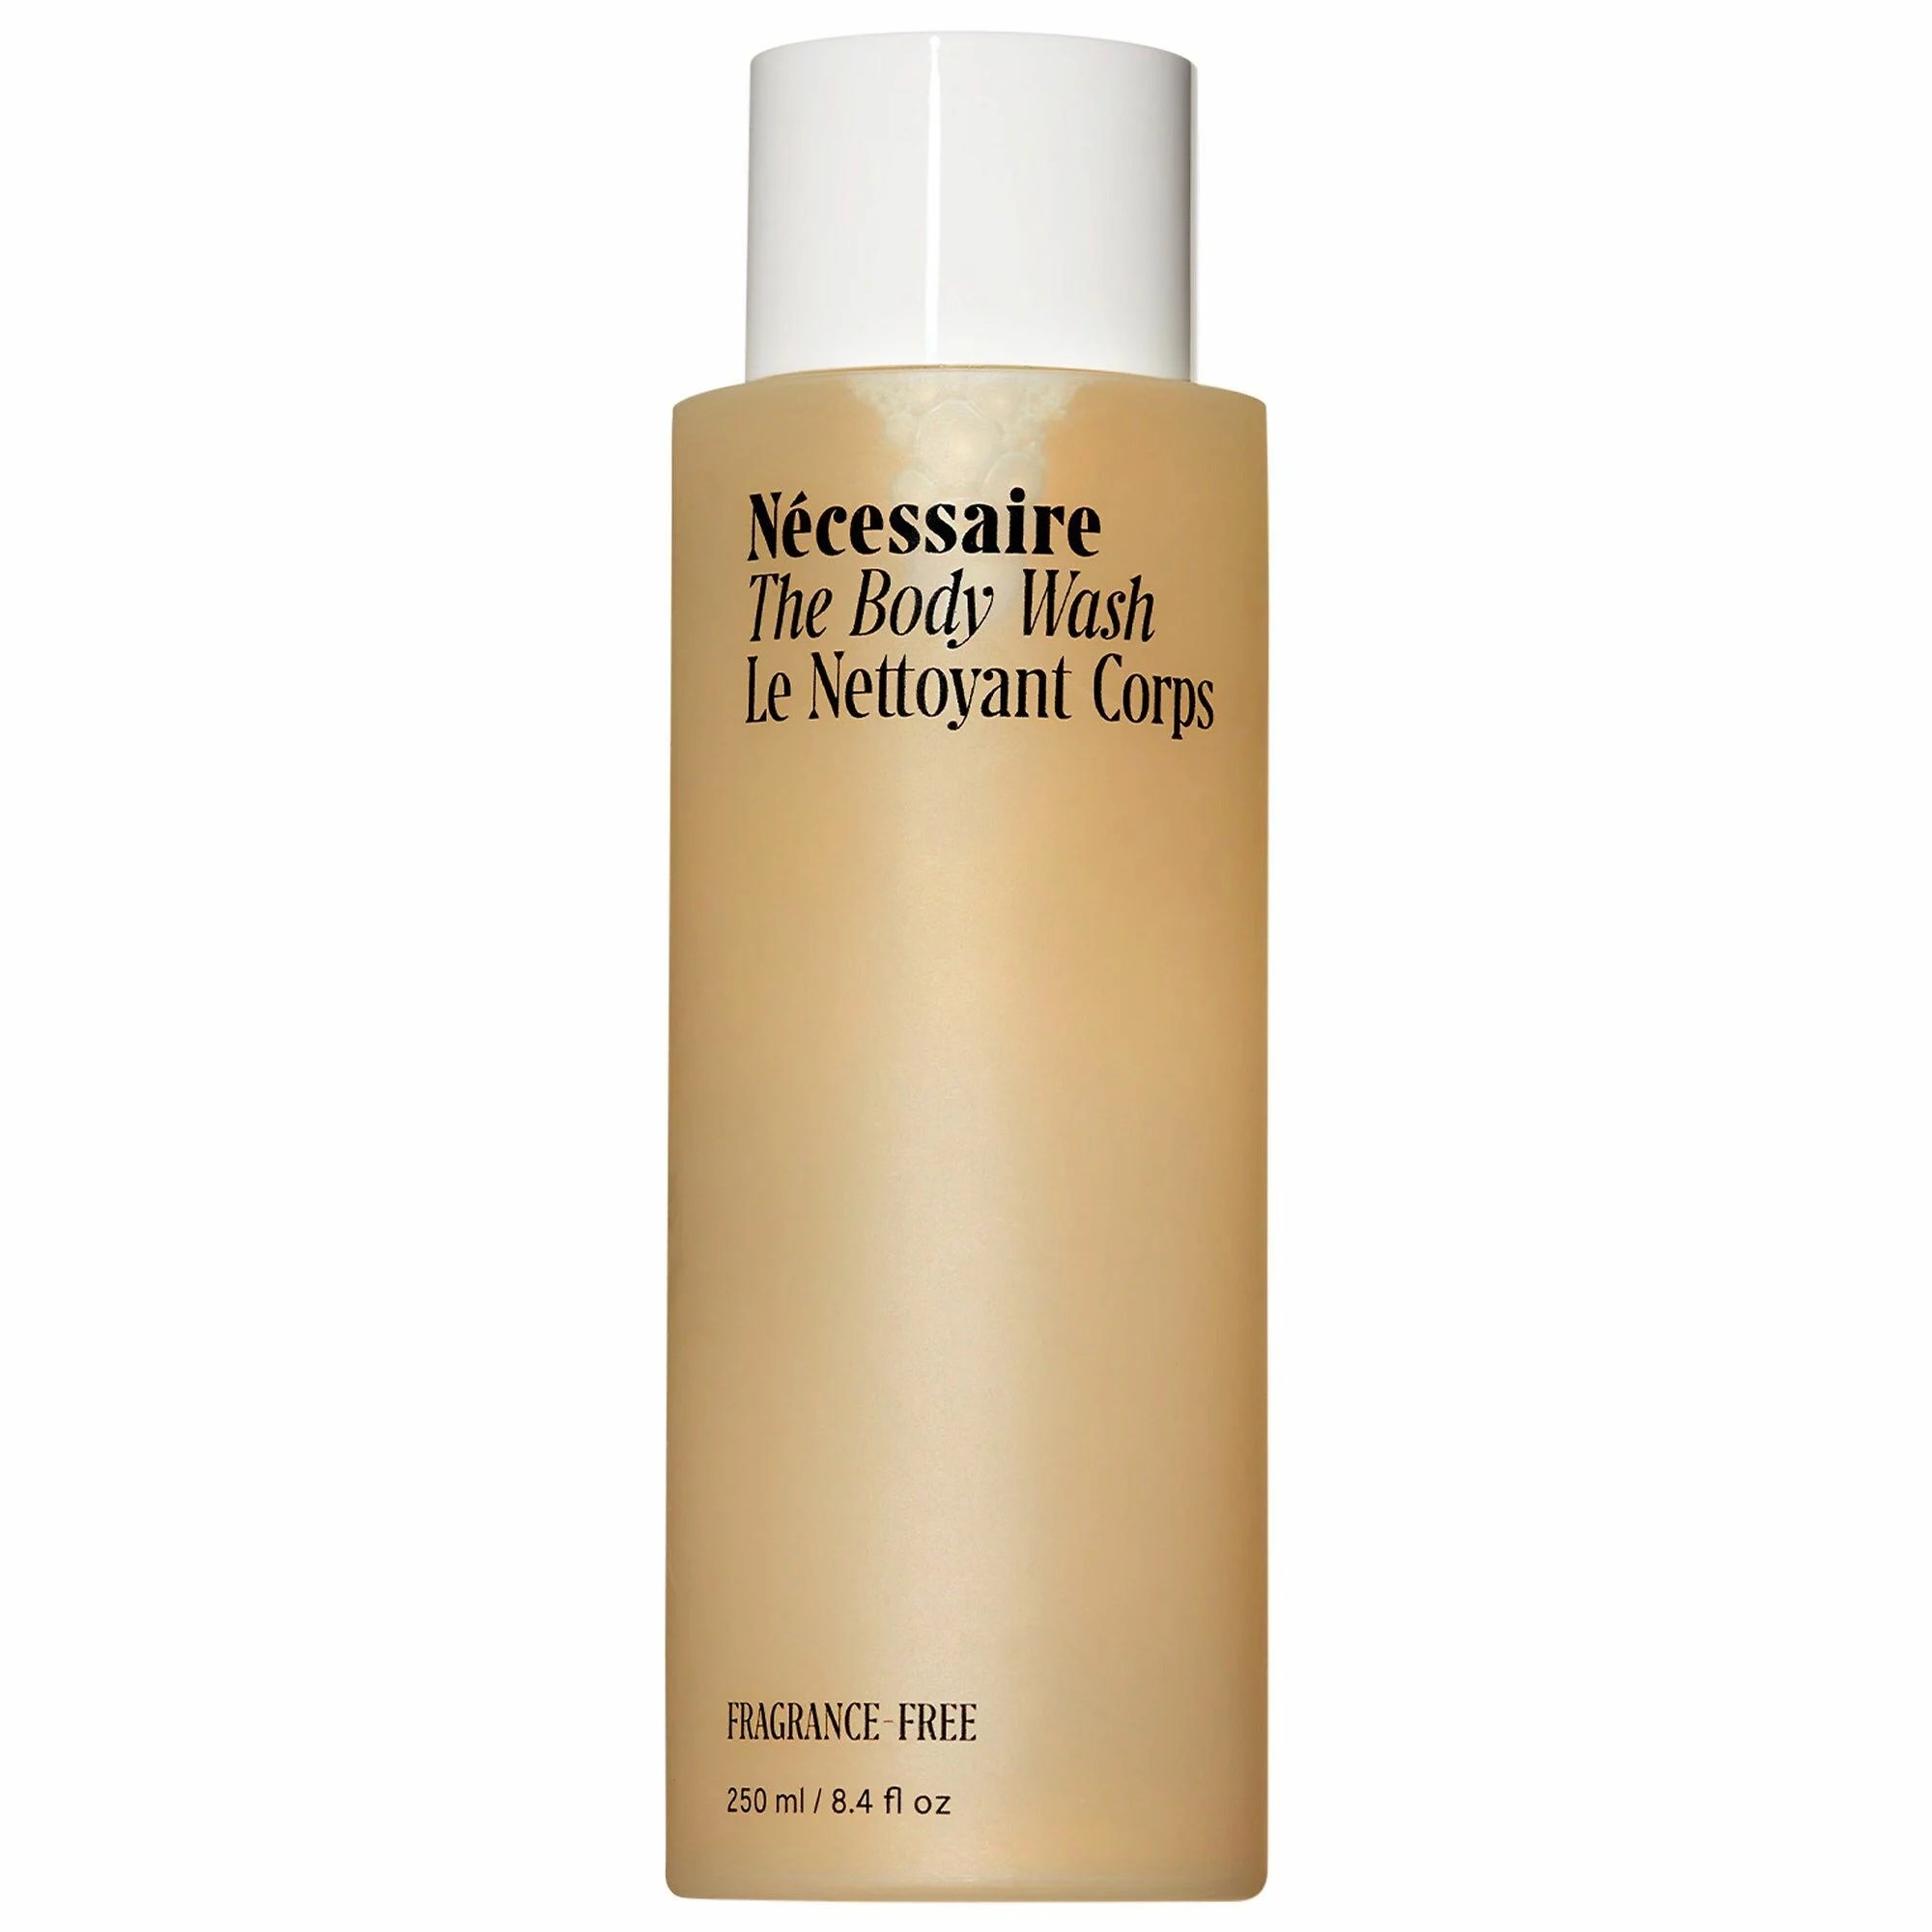 Nécessaire The Body Wash - With Niacinamide, sephora holiday savings event